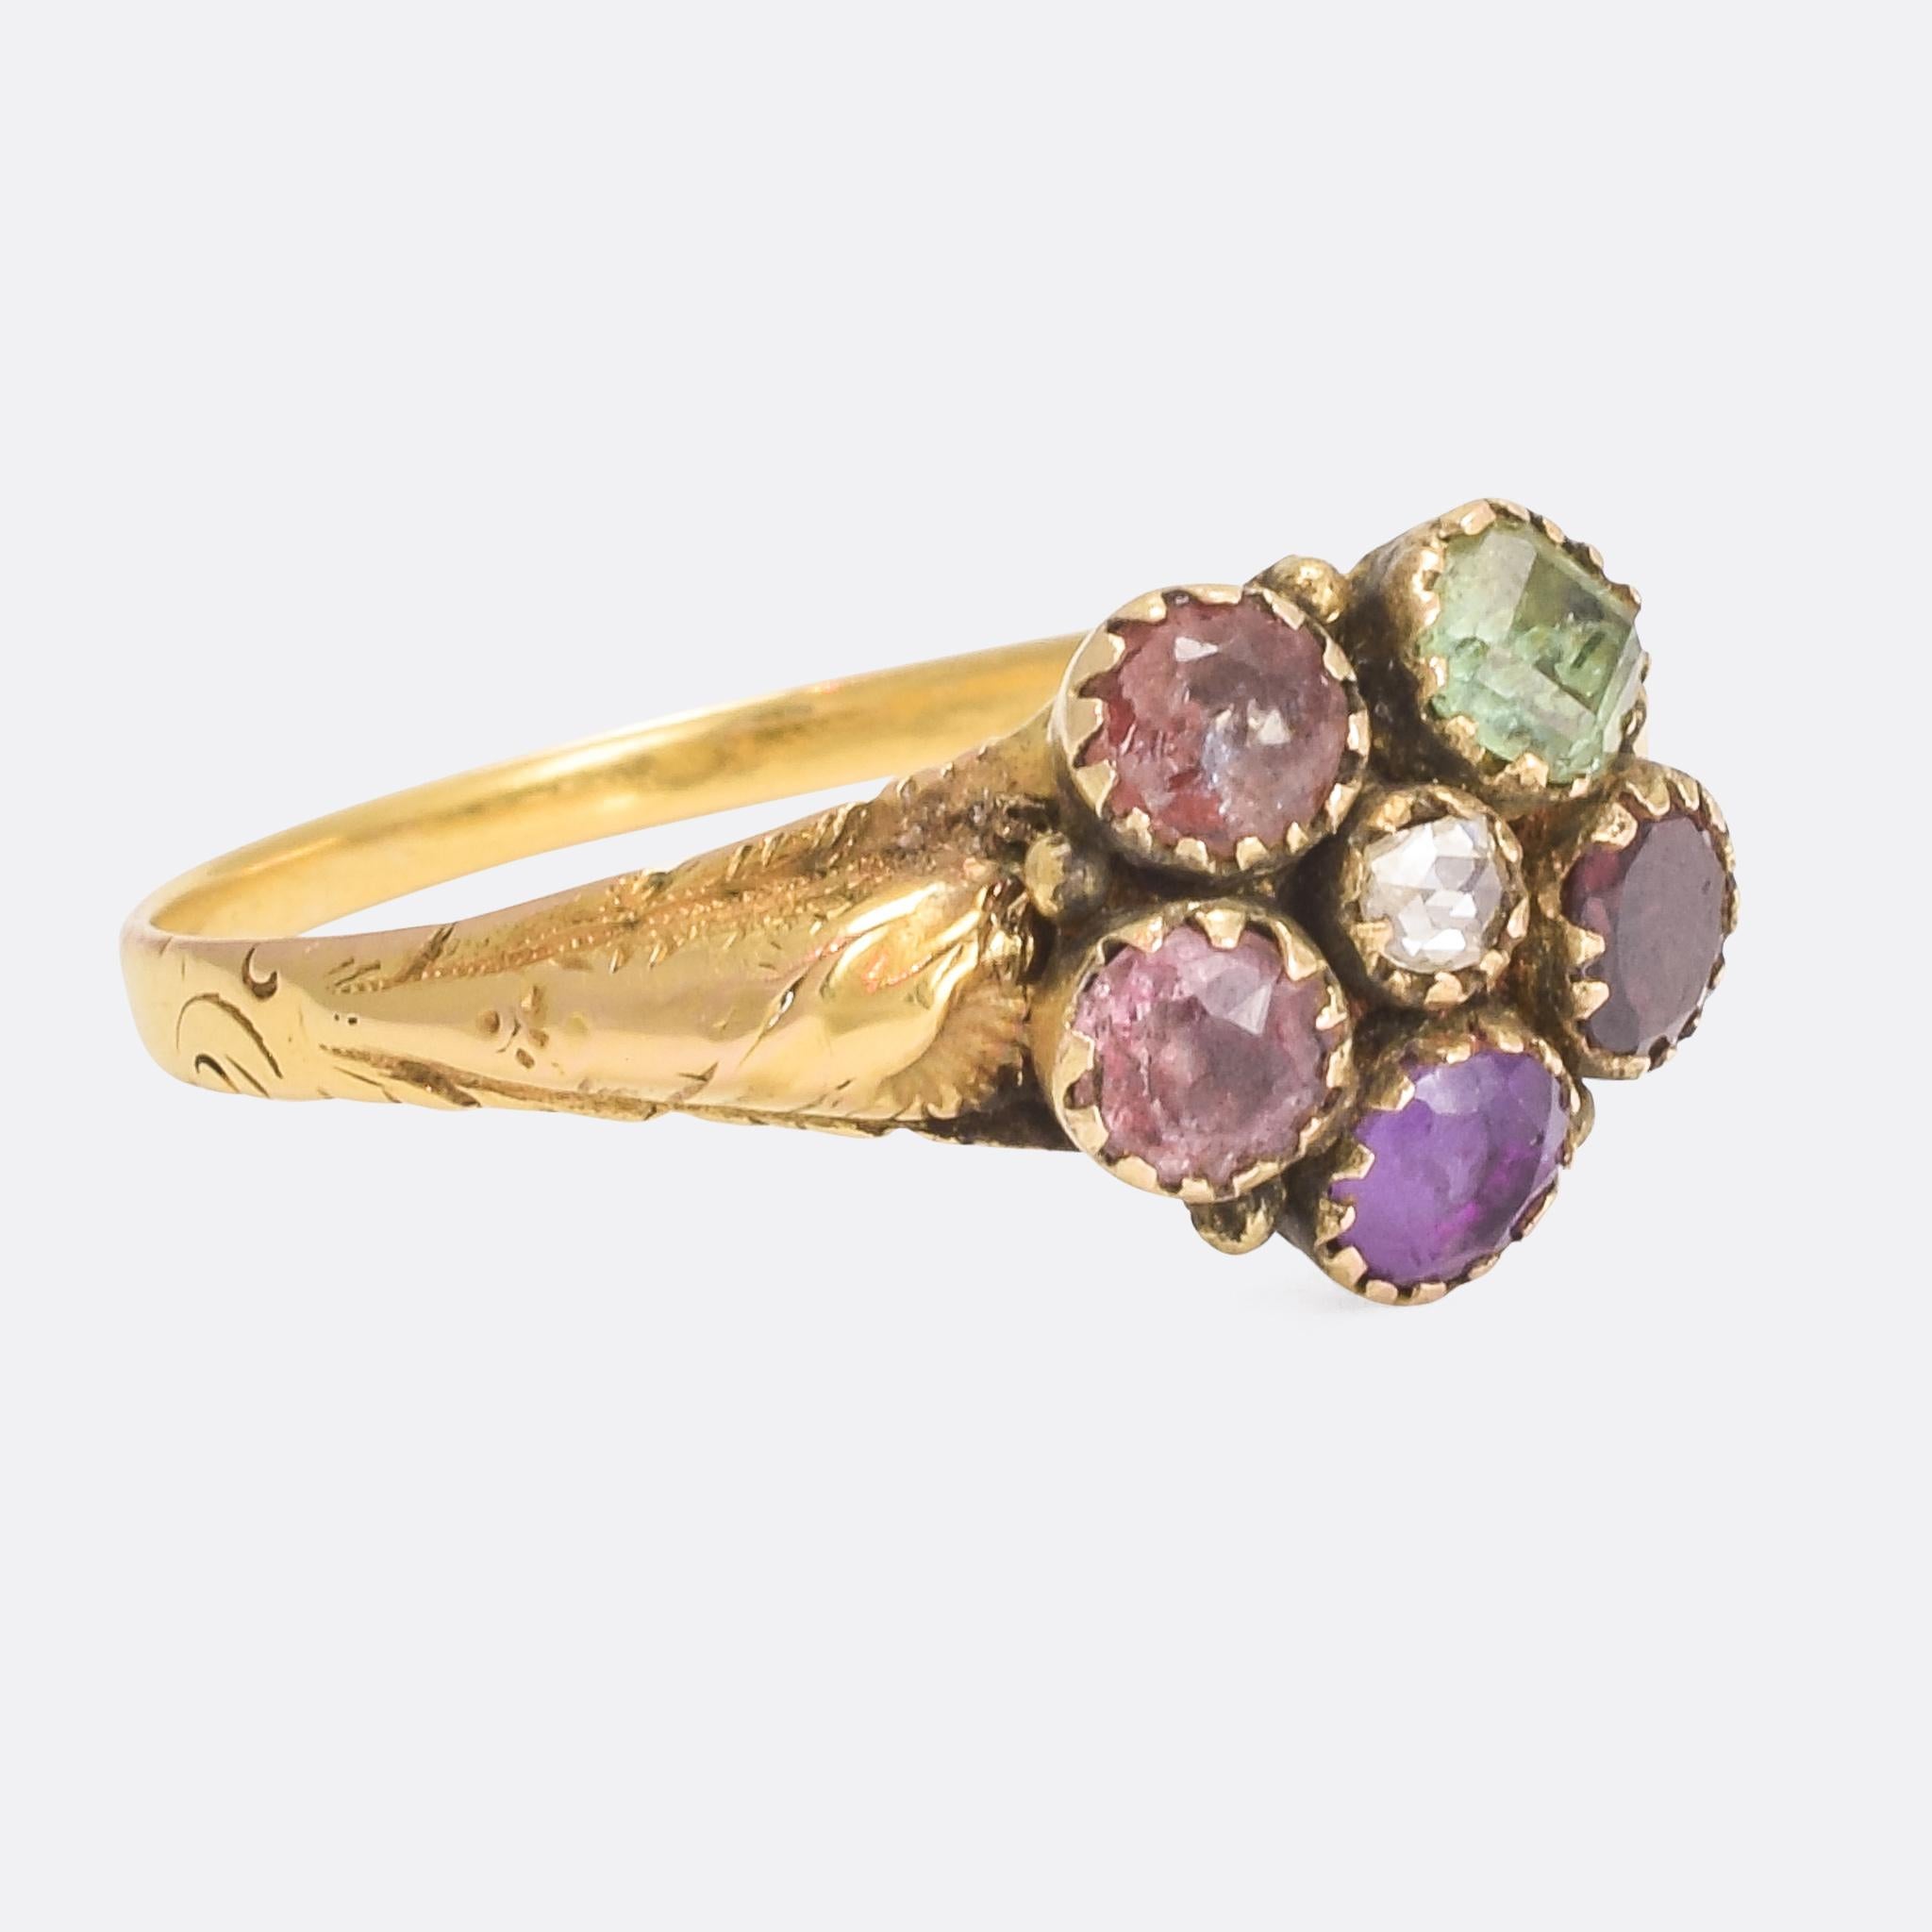 An exceptional Georgian acrostic ring, the first letter of each gemstone spells out the popular romantic sentiment REGARD. The ring dates from the early 19th Century, circa 1820, fully original with stone set in a Pansy Flower formation. these rings